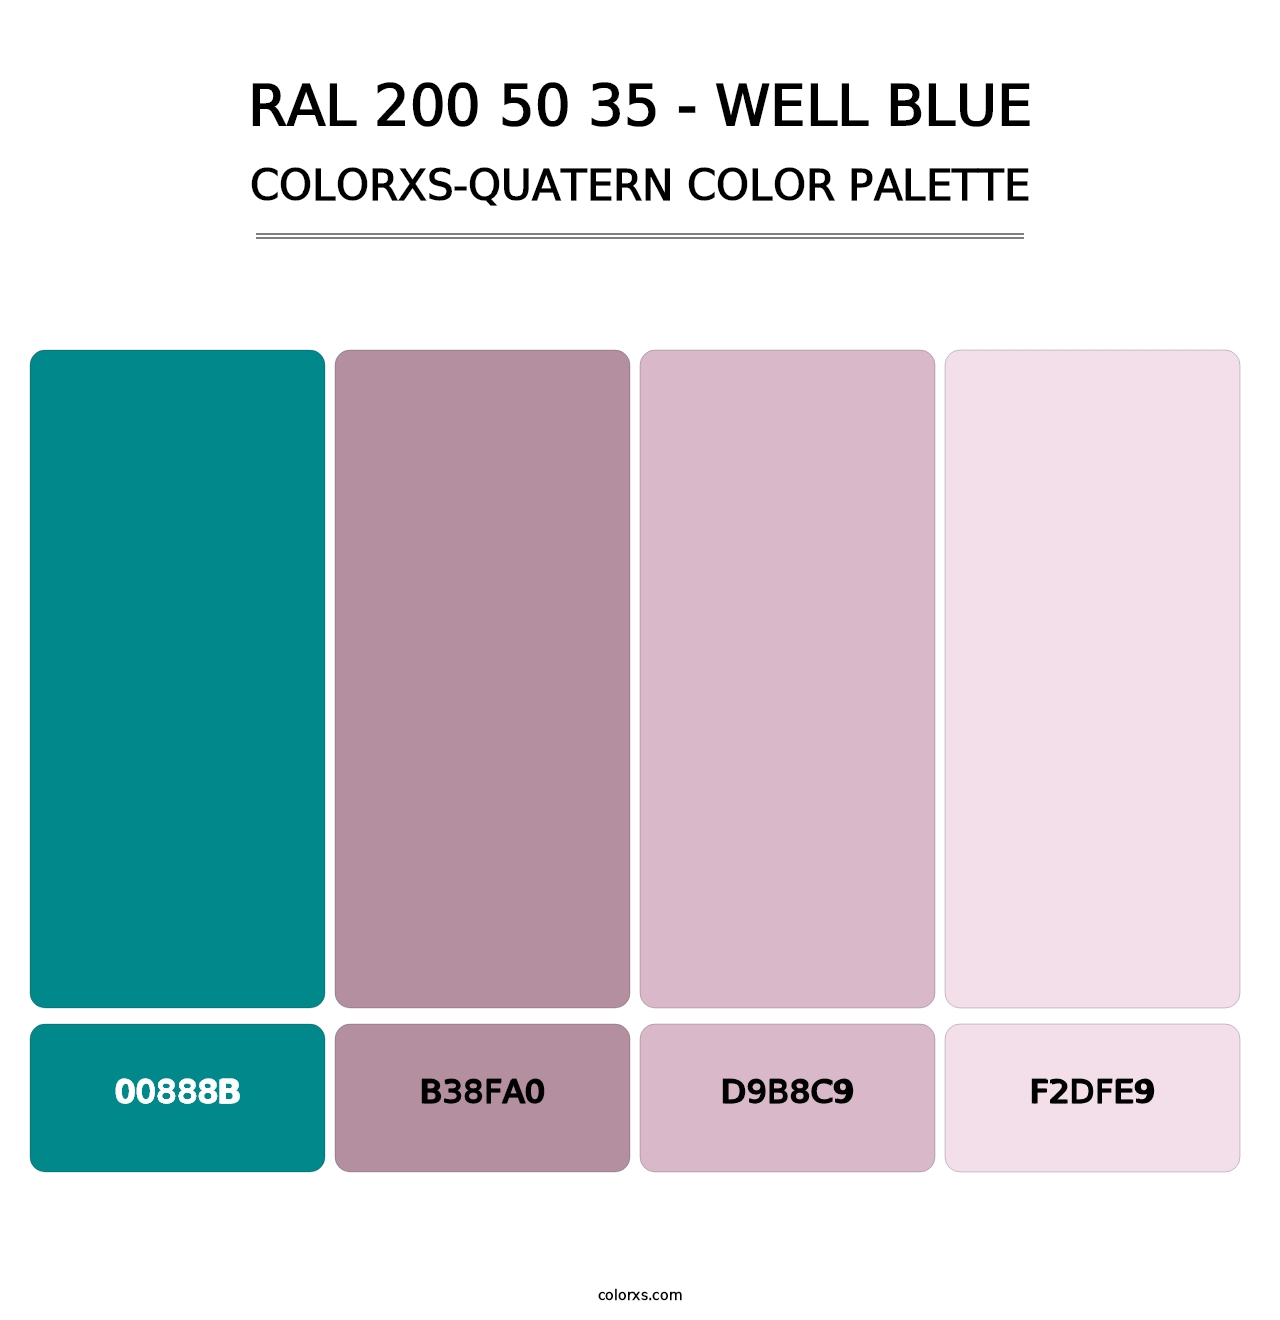 RAL 200 50 35 - Well Blue - Colorxs Quatern Palette